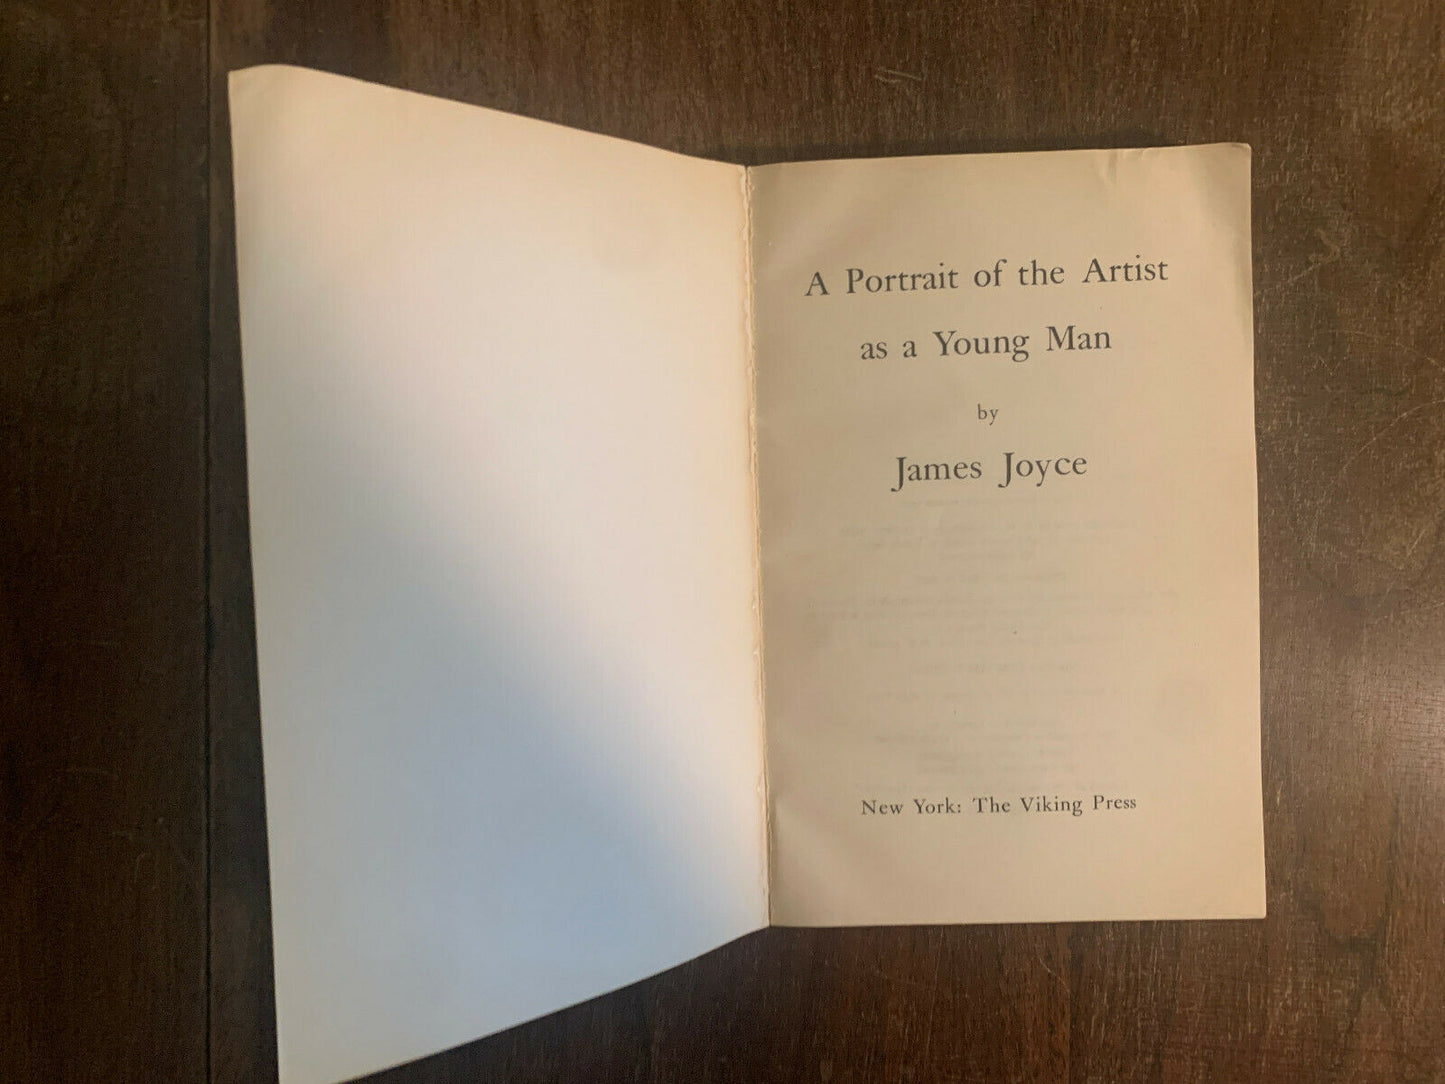 James Joyce Portrait of the Artist as a Young Man [1976]